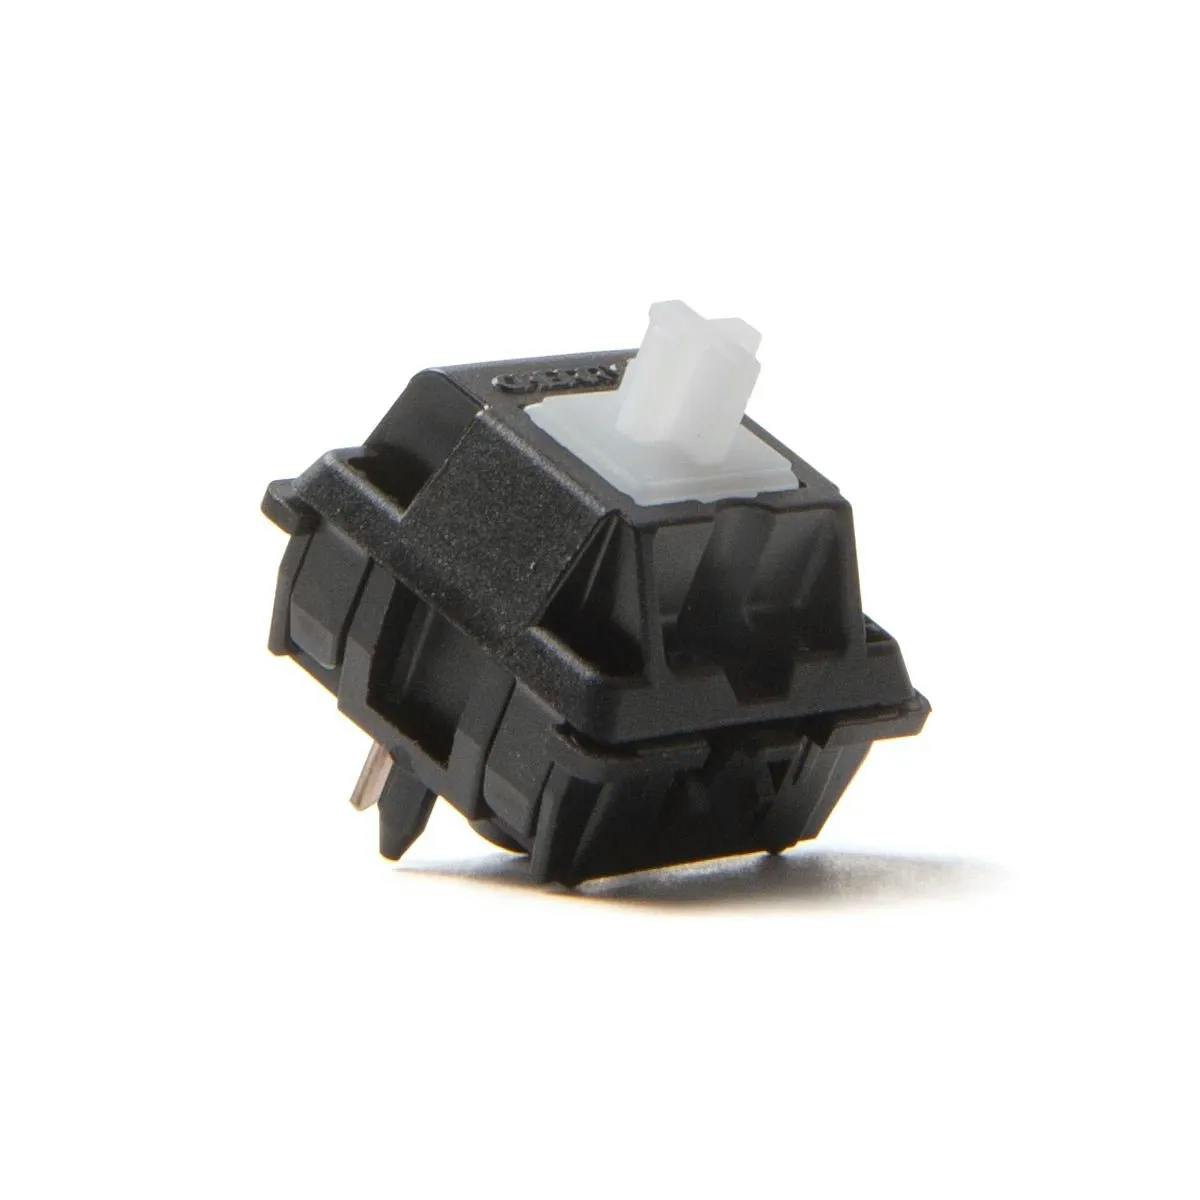 Image for Cherry MX Ergo Clear Tactile Switches